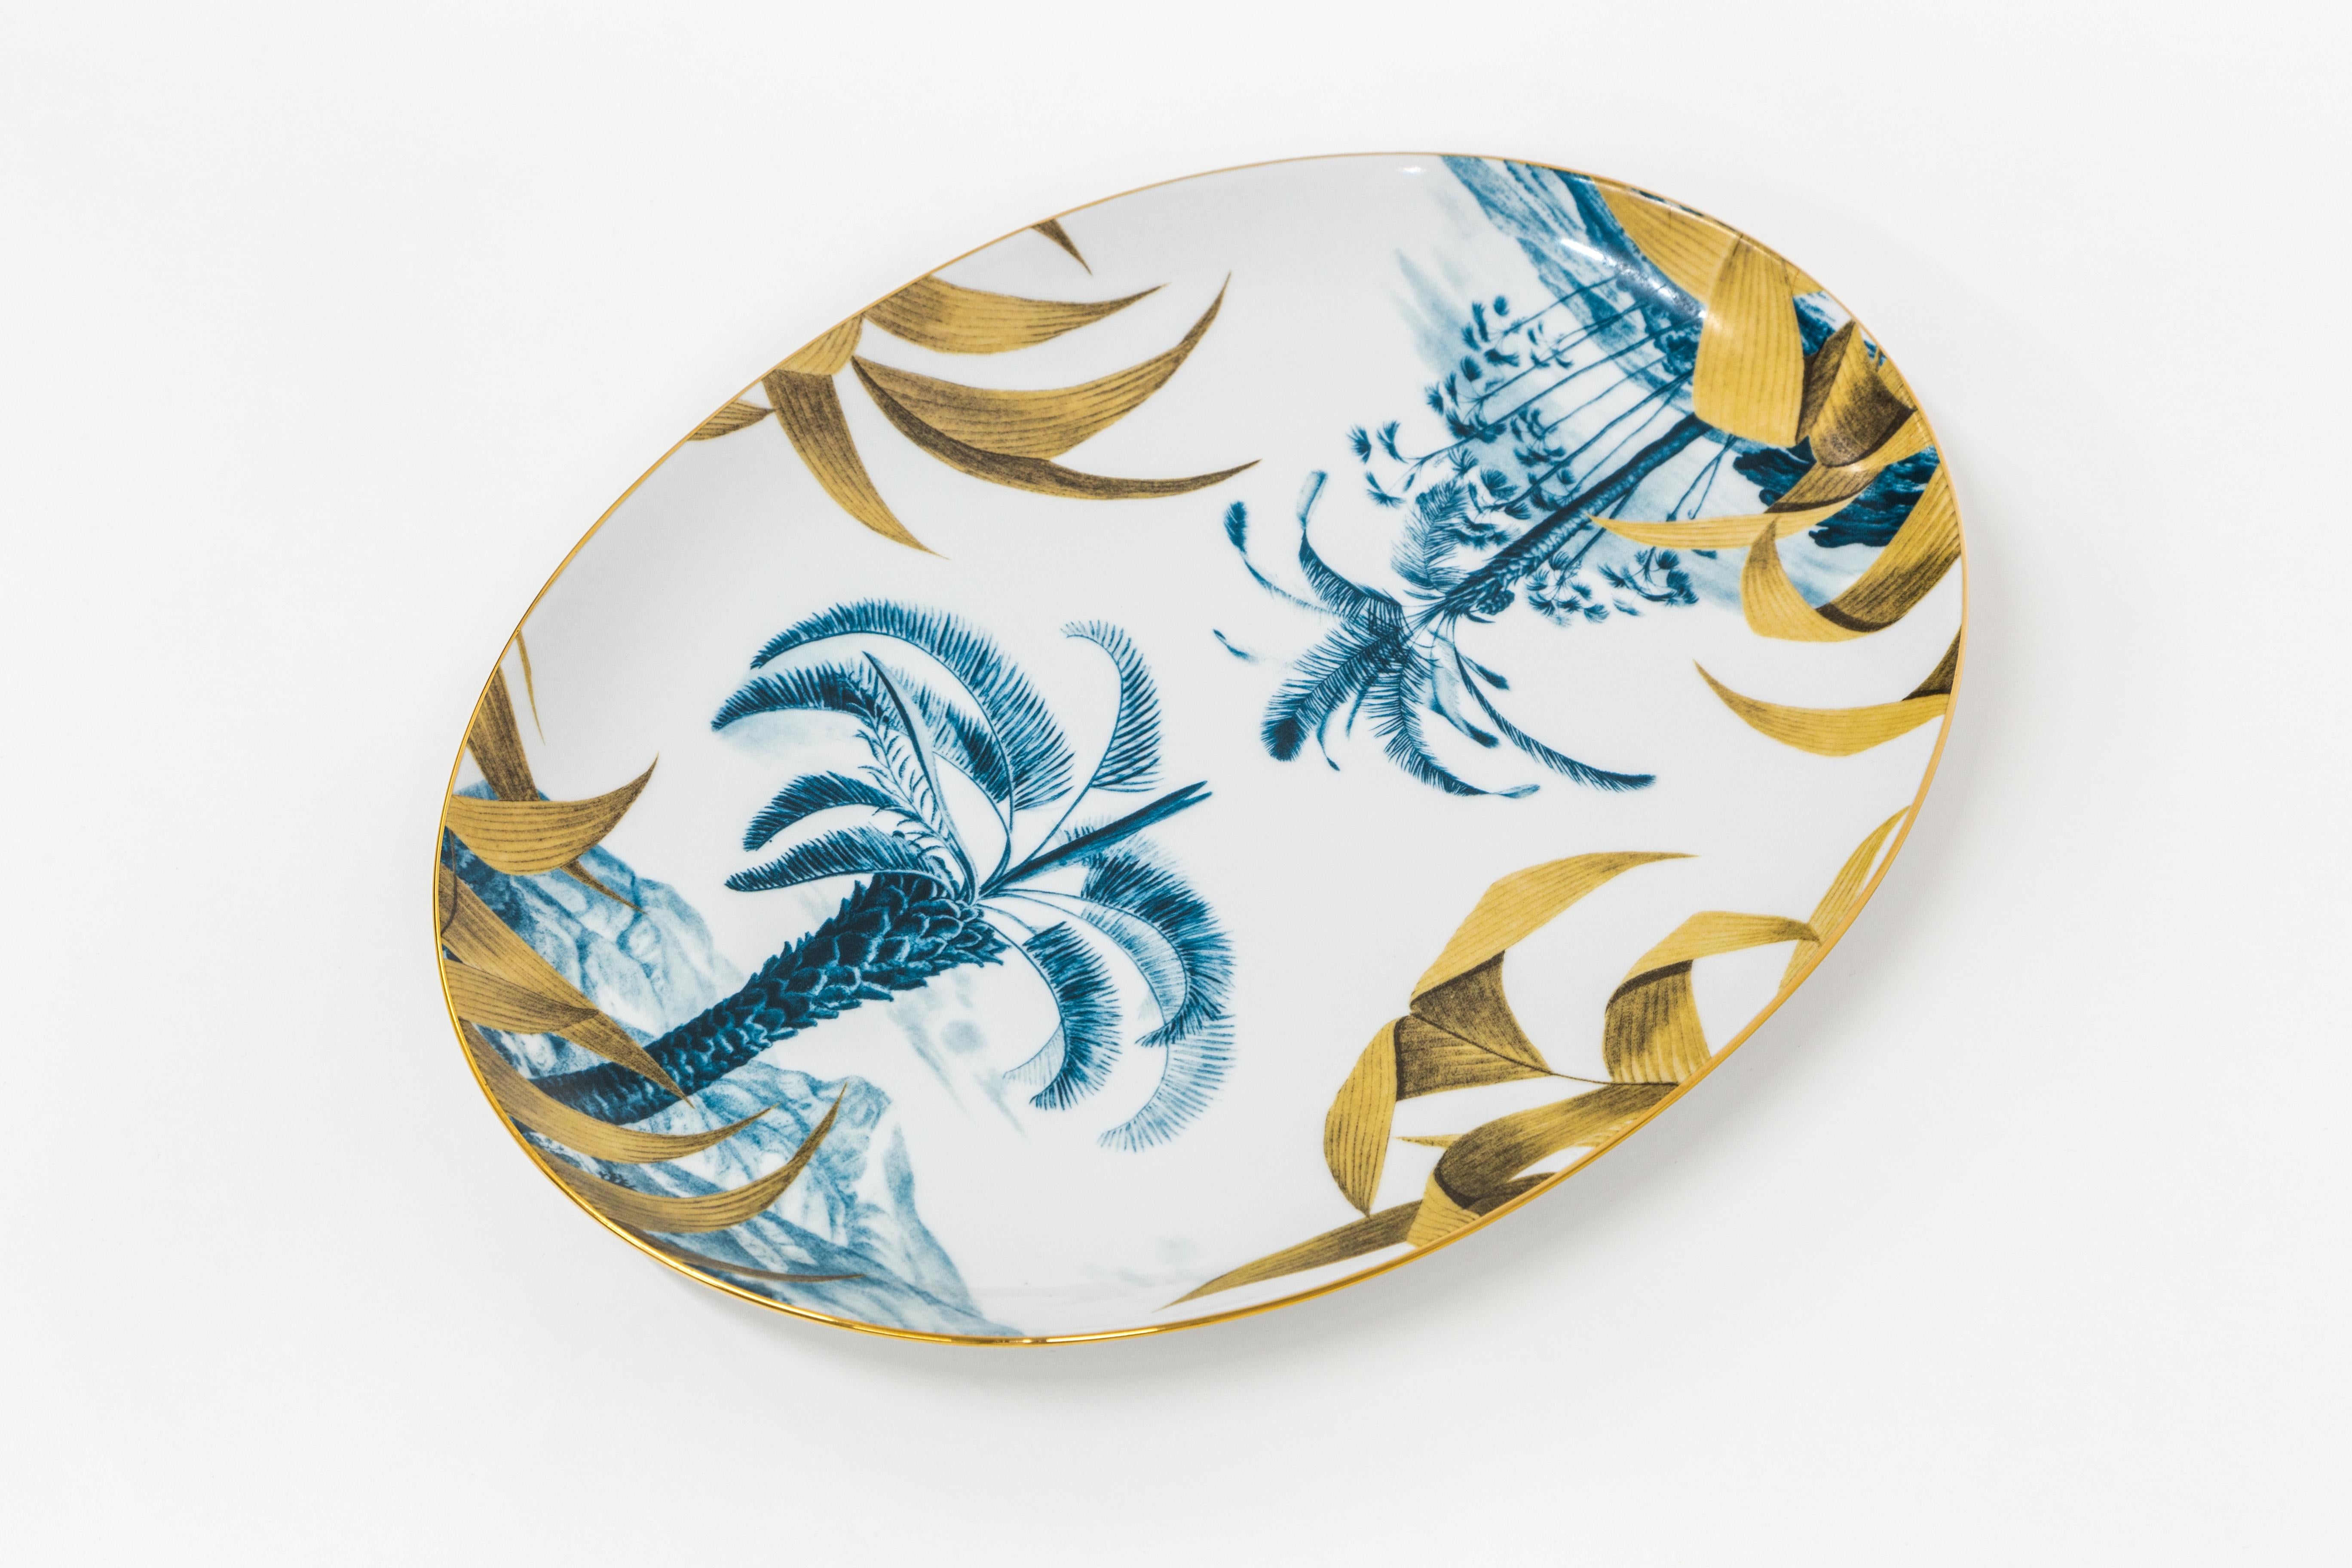 This 28x38cm oval tray is part of Las Palmas collection by Grand Tour by Vito Nesta. The classic and versatile shape is a must-have inside any home to embellish a table or beautify a wall. This tray features two blue tropical landscapes whose main